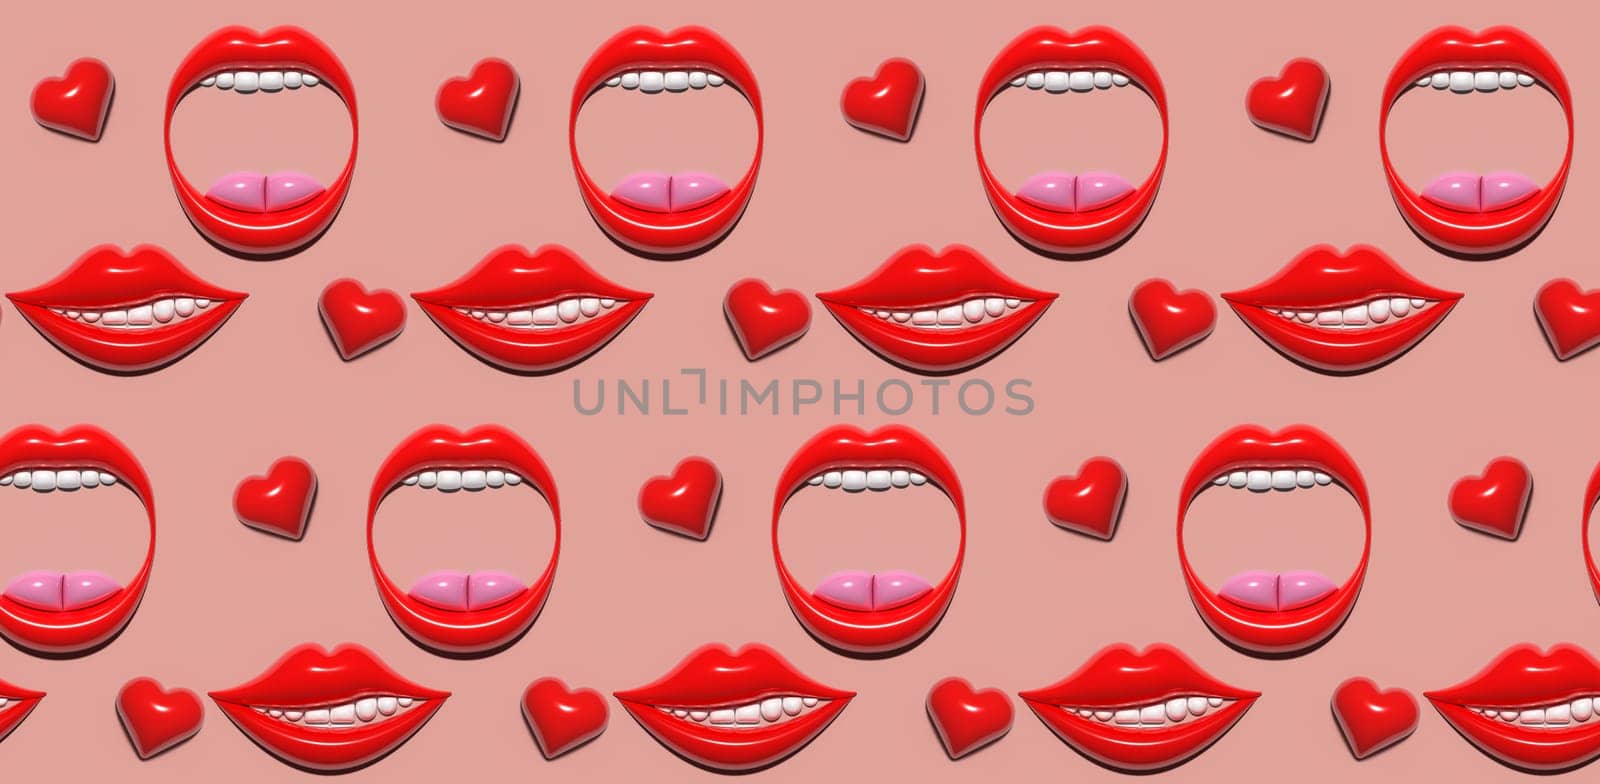 Smile, open mouth with red lips and white teeth and hearts on a pink background, tsor. 3D rendering illustration